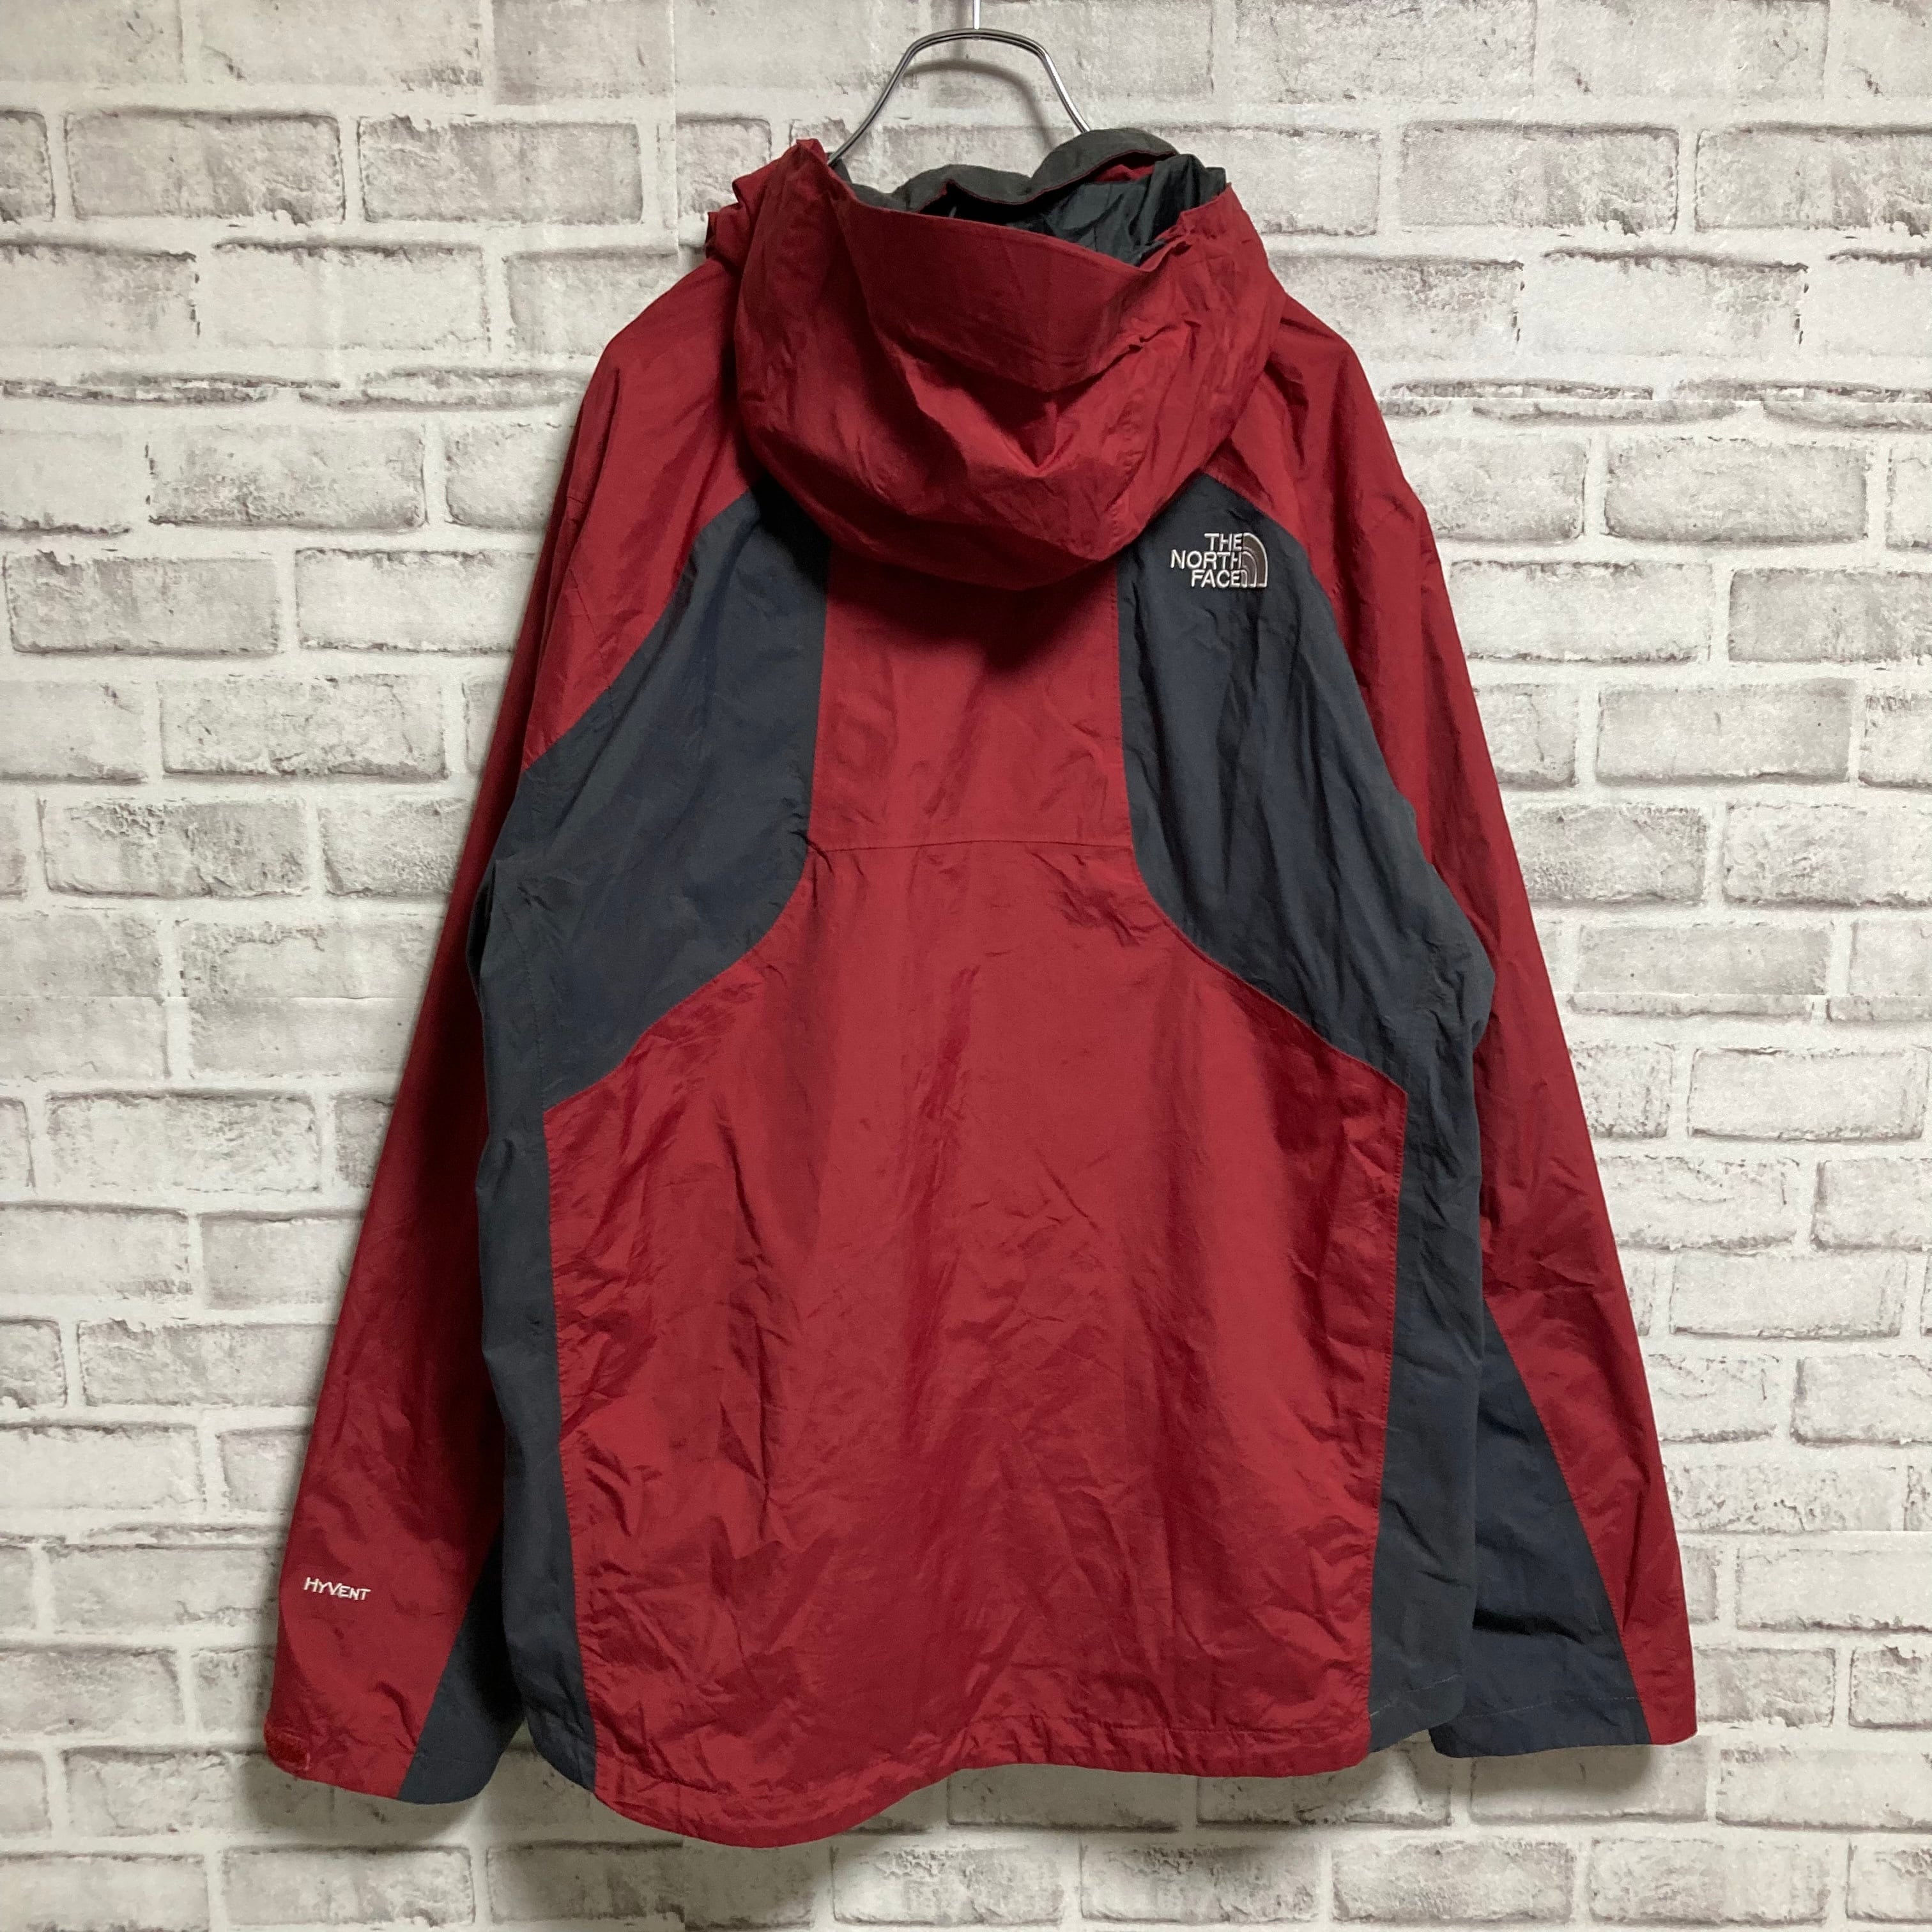 THE NORTH FACE】Mountain Parka L HYVENT ノースフェイス マウンテン